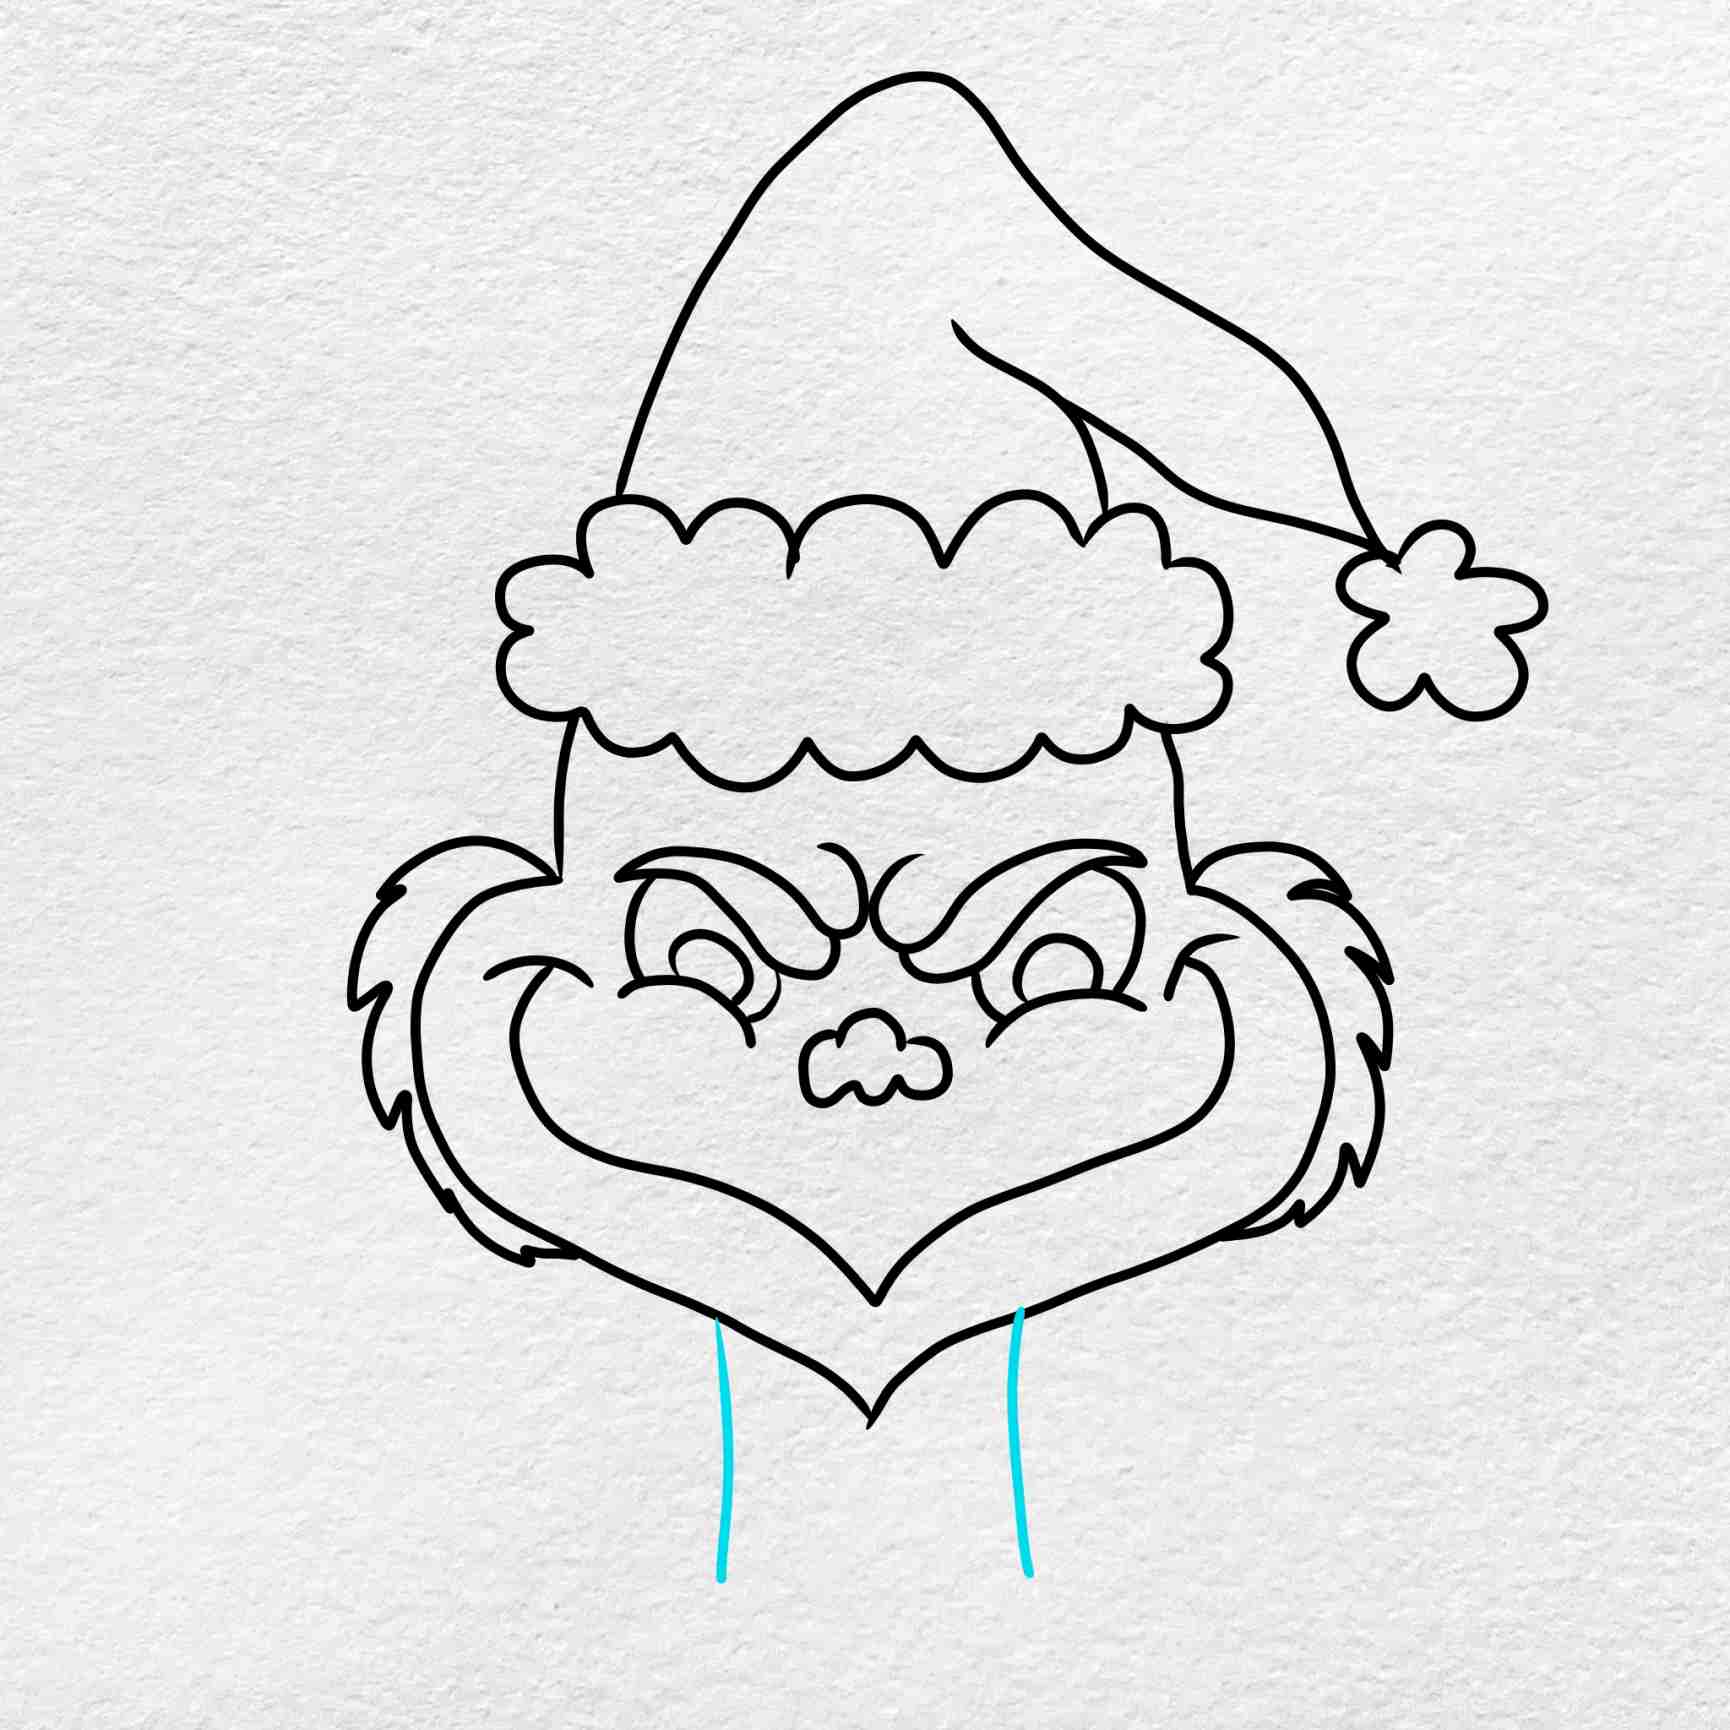 How to draw the grinch